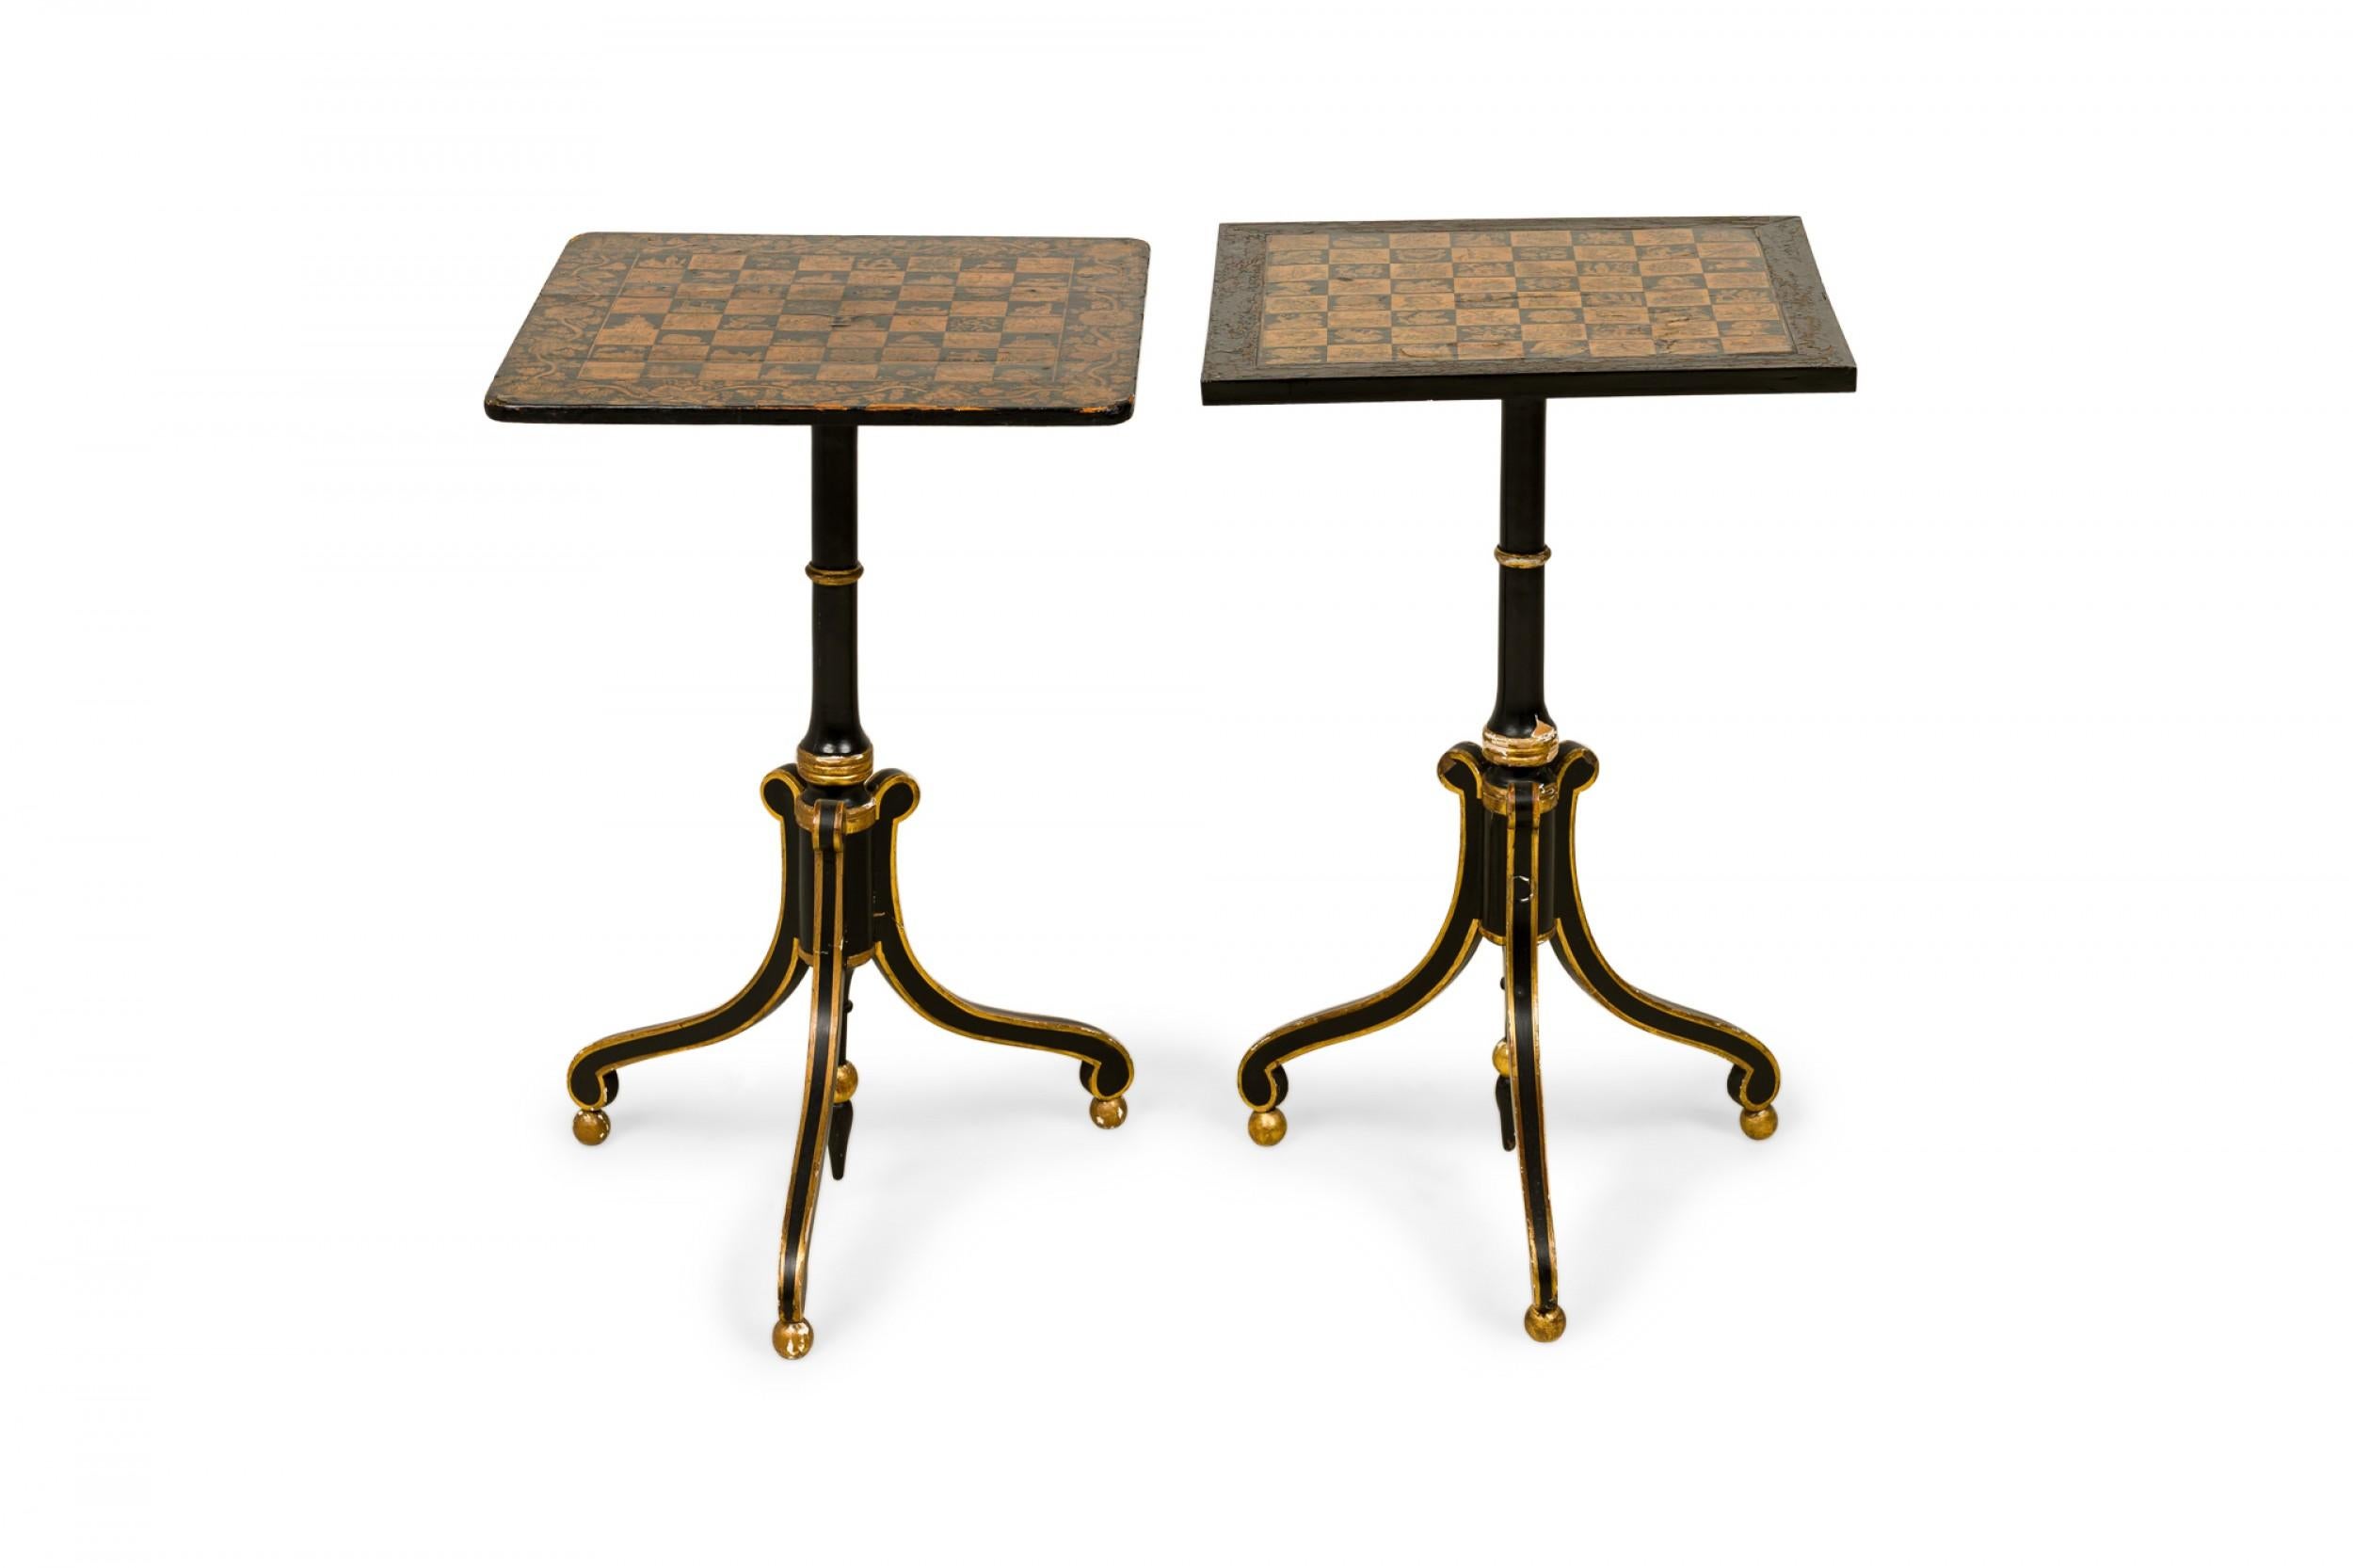 Pair of similar English Regency penwork chess tables with square wooden tops featuring painted chess boards in black and gold with elaborate designs in each square, surrounded by a foliate border, resting on pedestal bases with three gold-trimmed